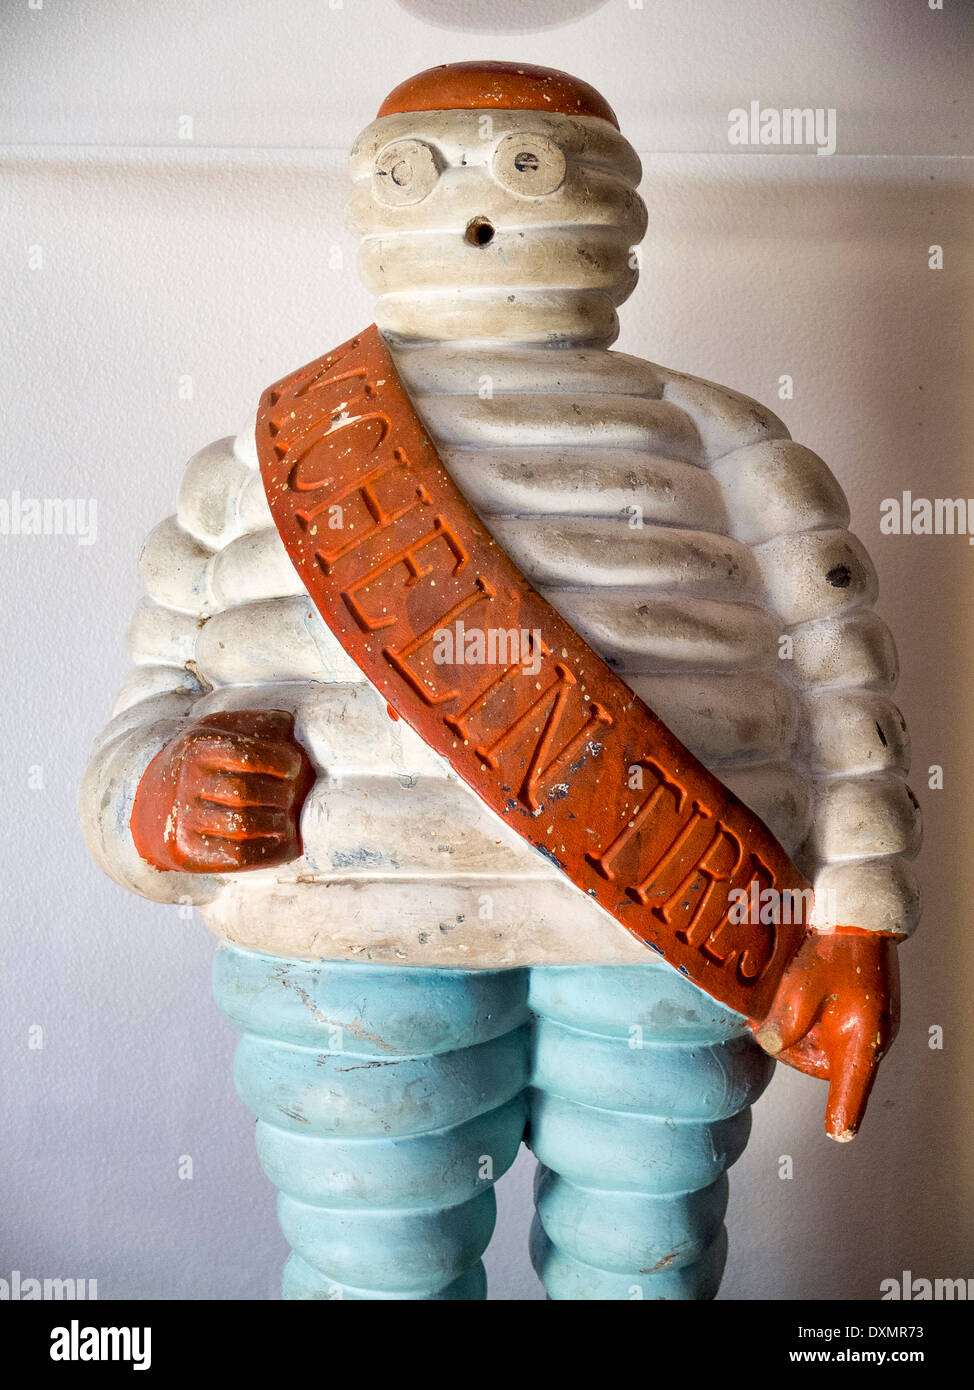 Bibendum, commonly referred to as the Michelin Man, is the symbol of the Michelin tire company. Introduced in 1894 Stock Photo